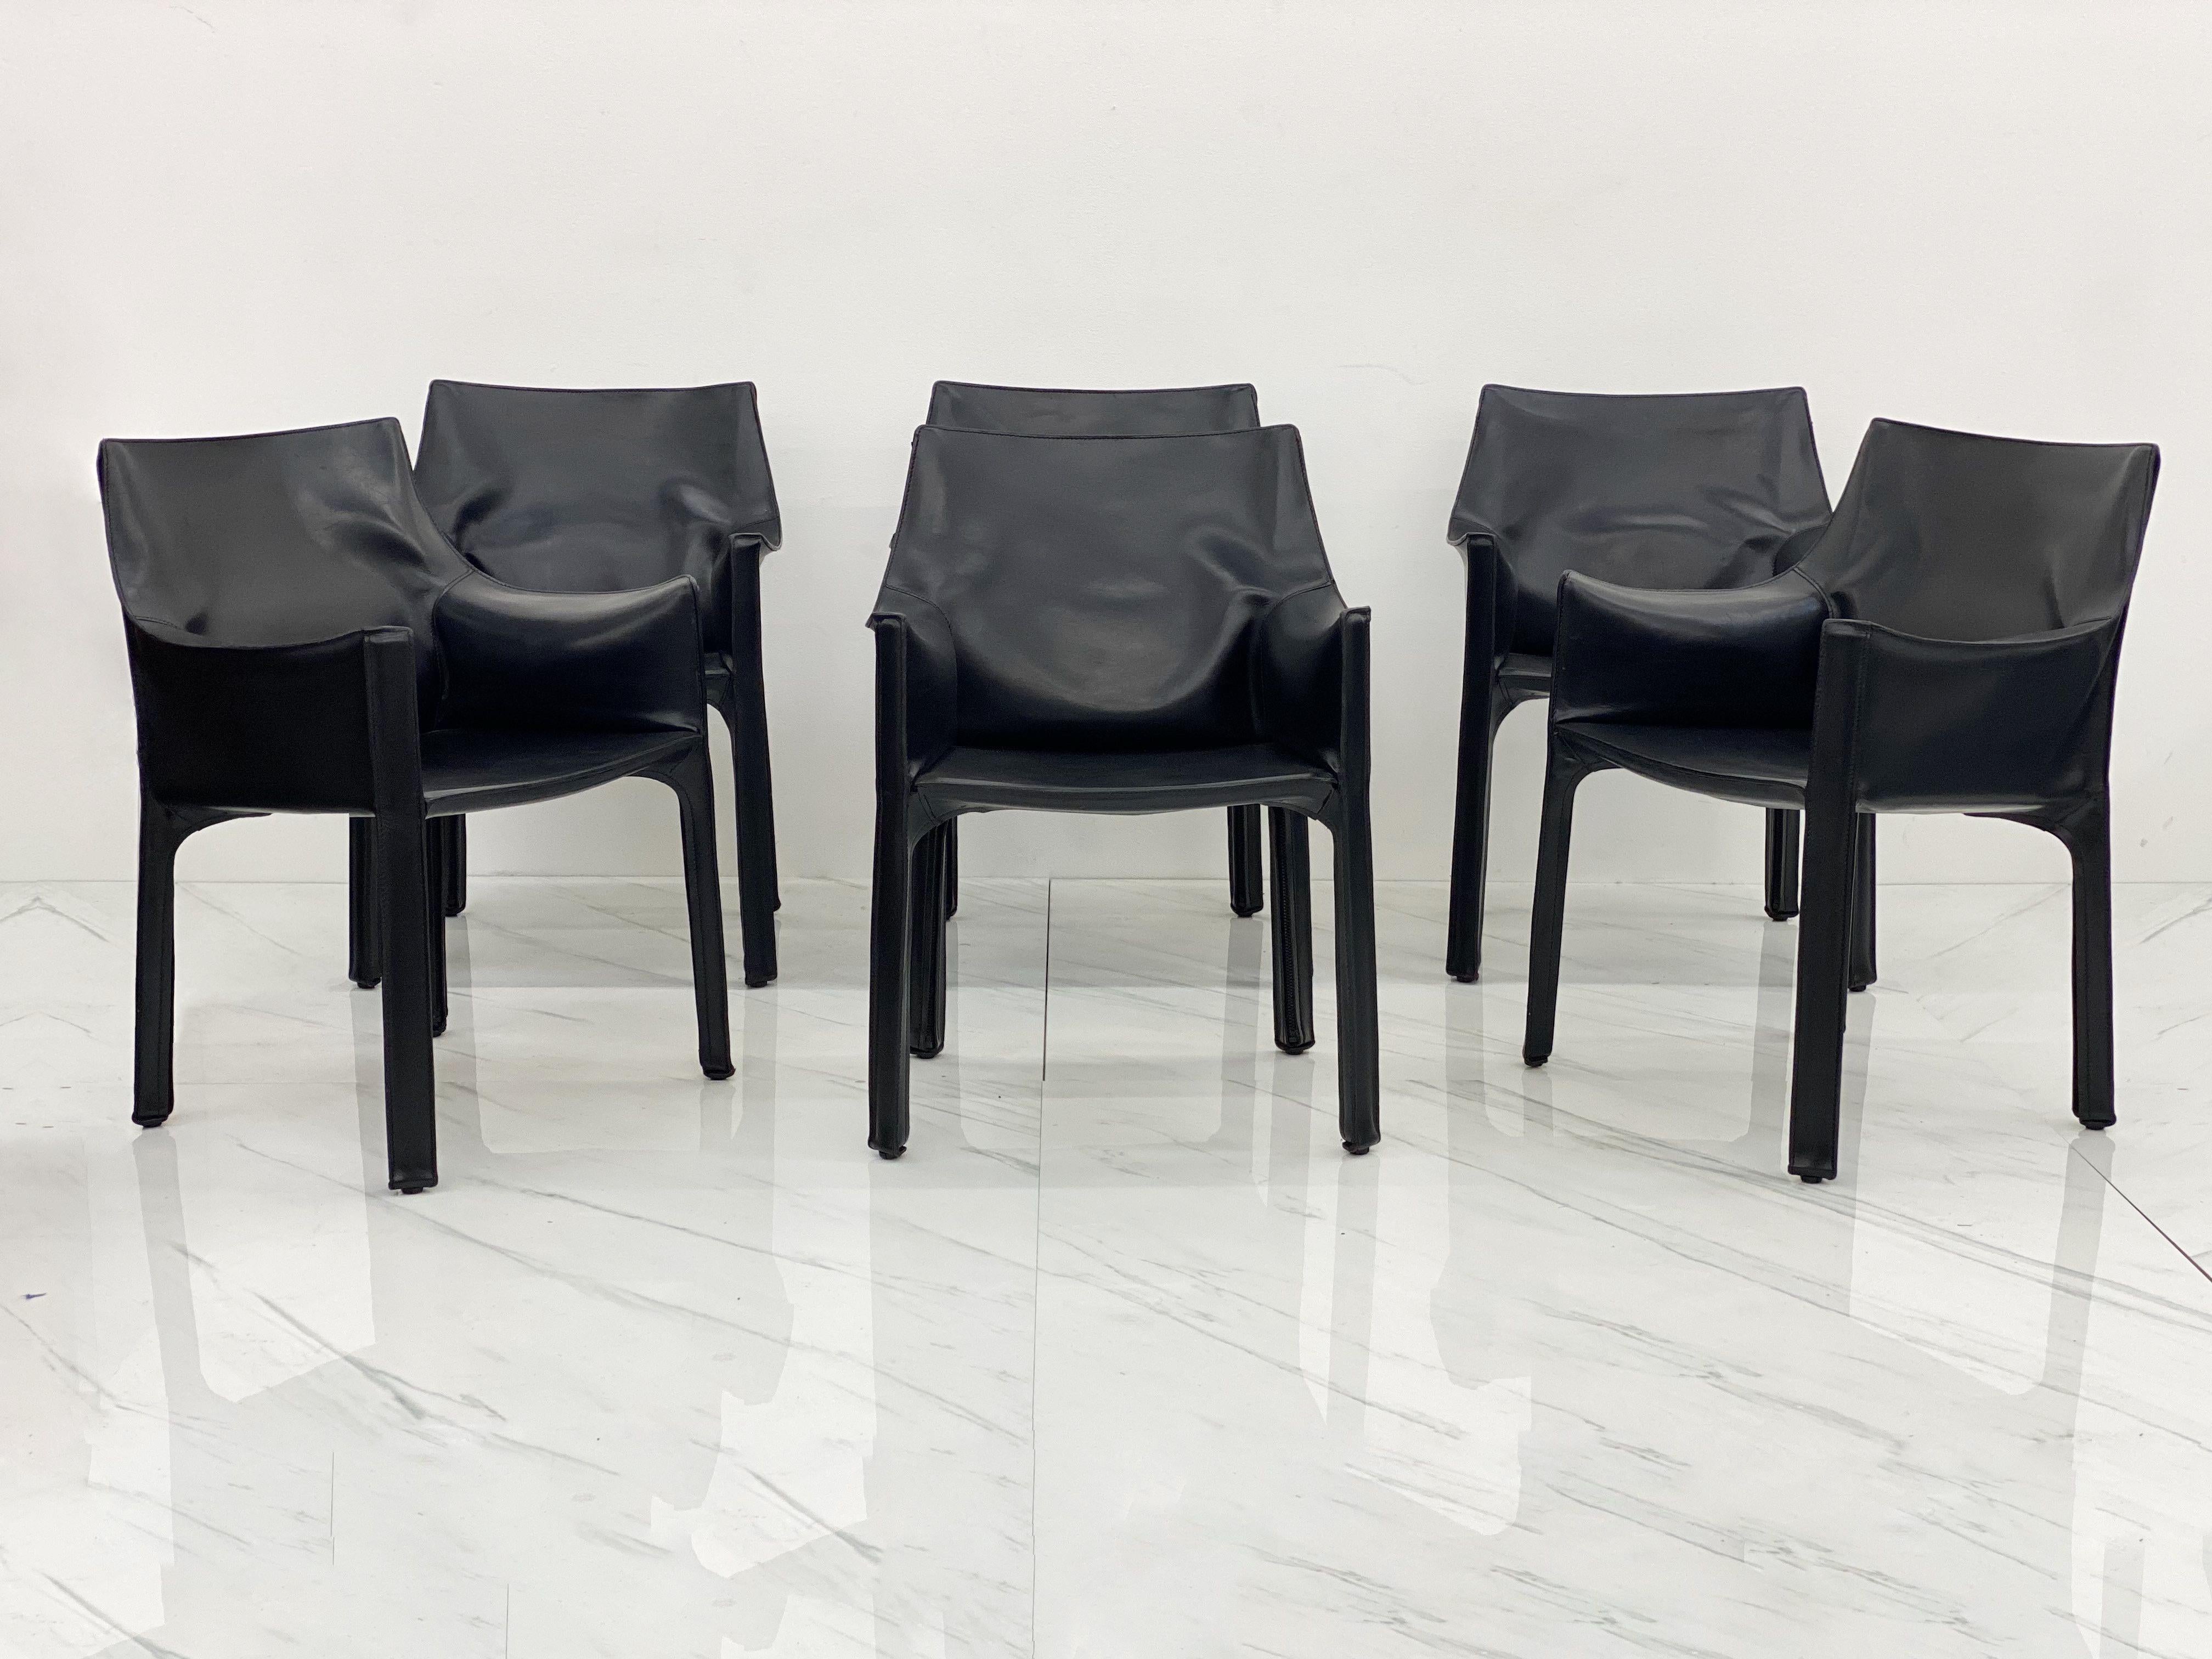 A rare set of six (6) early year 'original' production Model #413 'Cab' armchairs in gorgeous deep black leather by Mario Bellini for Cassina. Designed in 1977, this set is from Cassina's original years of production of this design, circa late 1970s